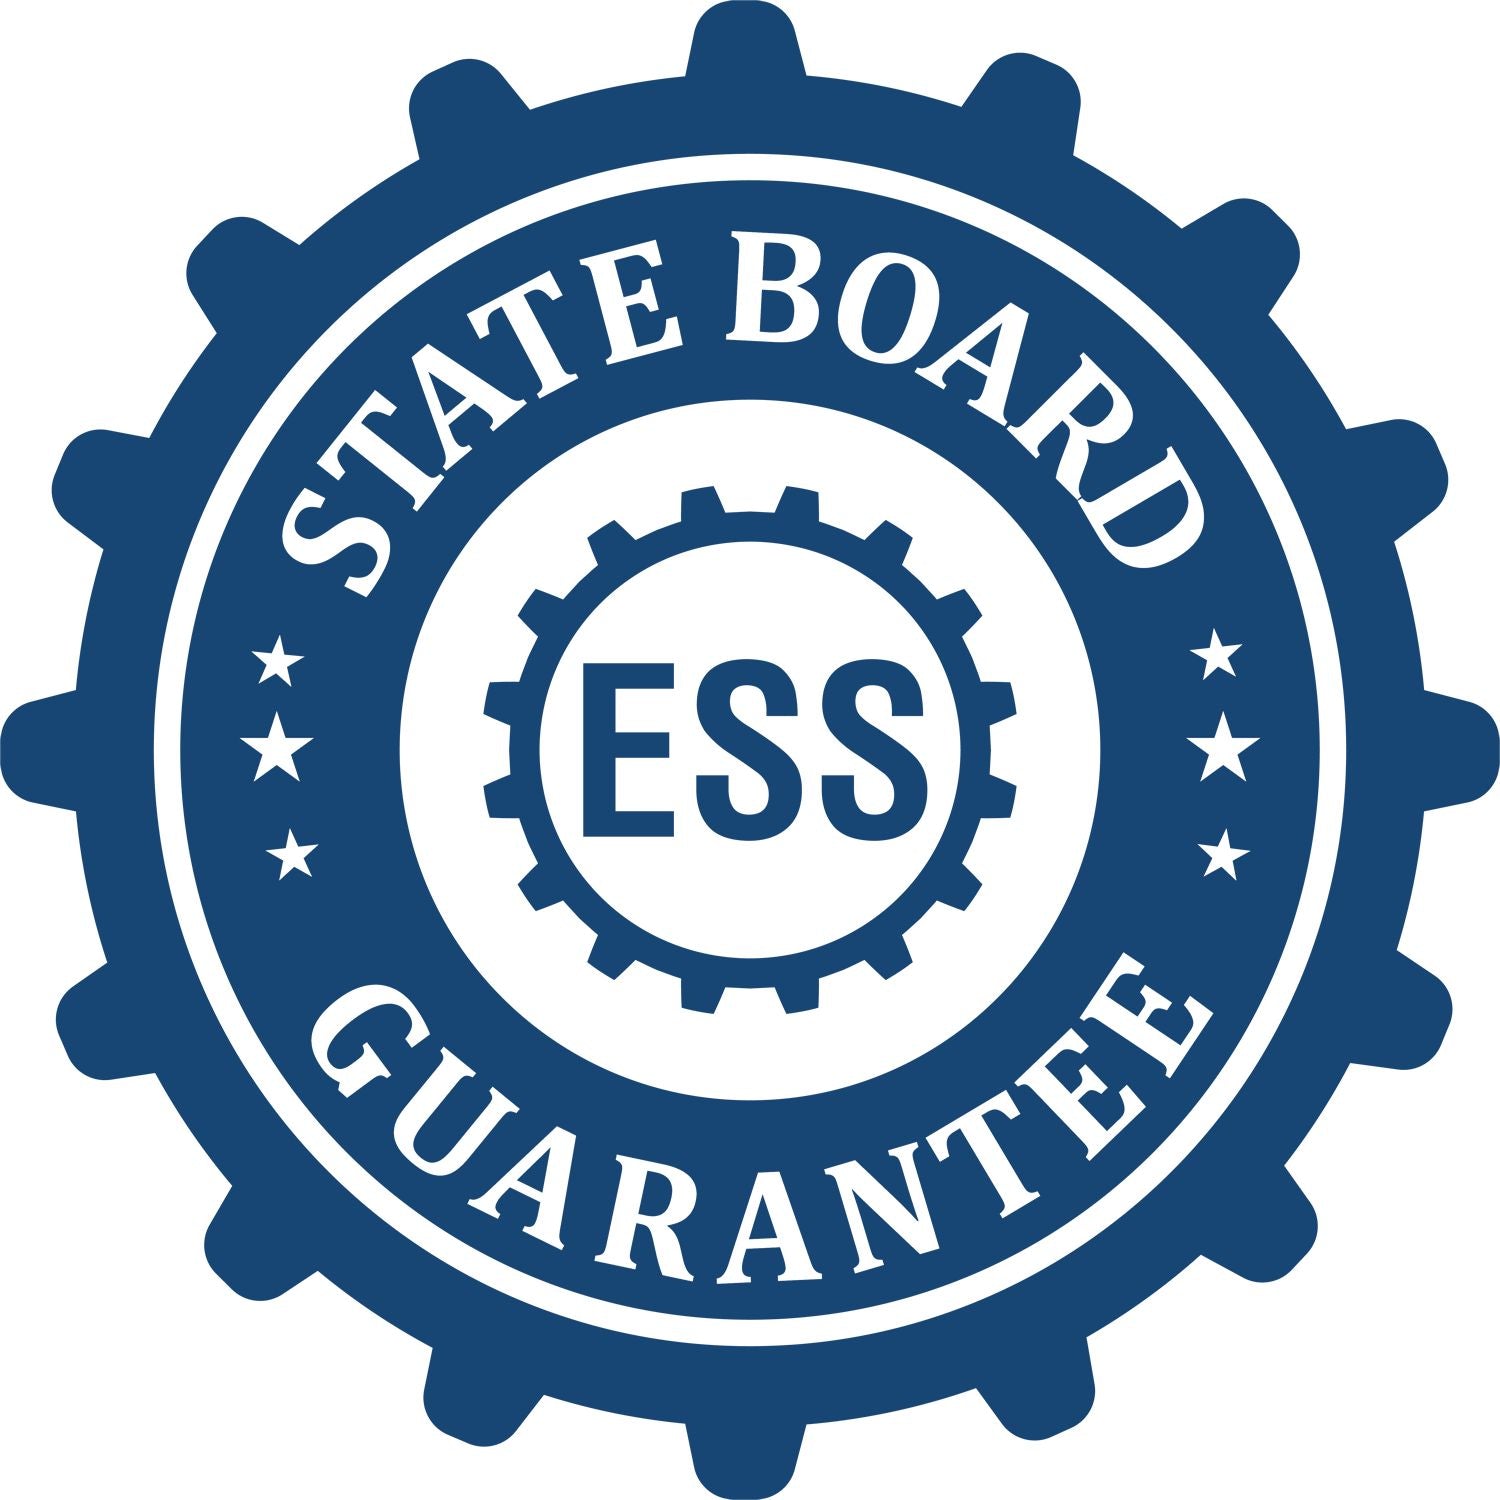 An emblem in a gear shape illustrating a state board guarantee for the State of Colorado Extended Long Reach Engineer Seal product.